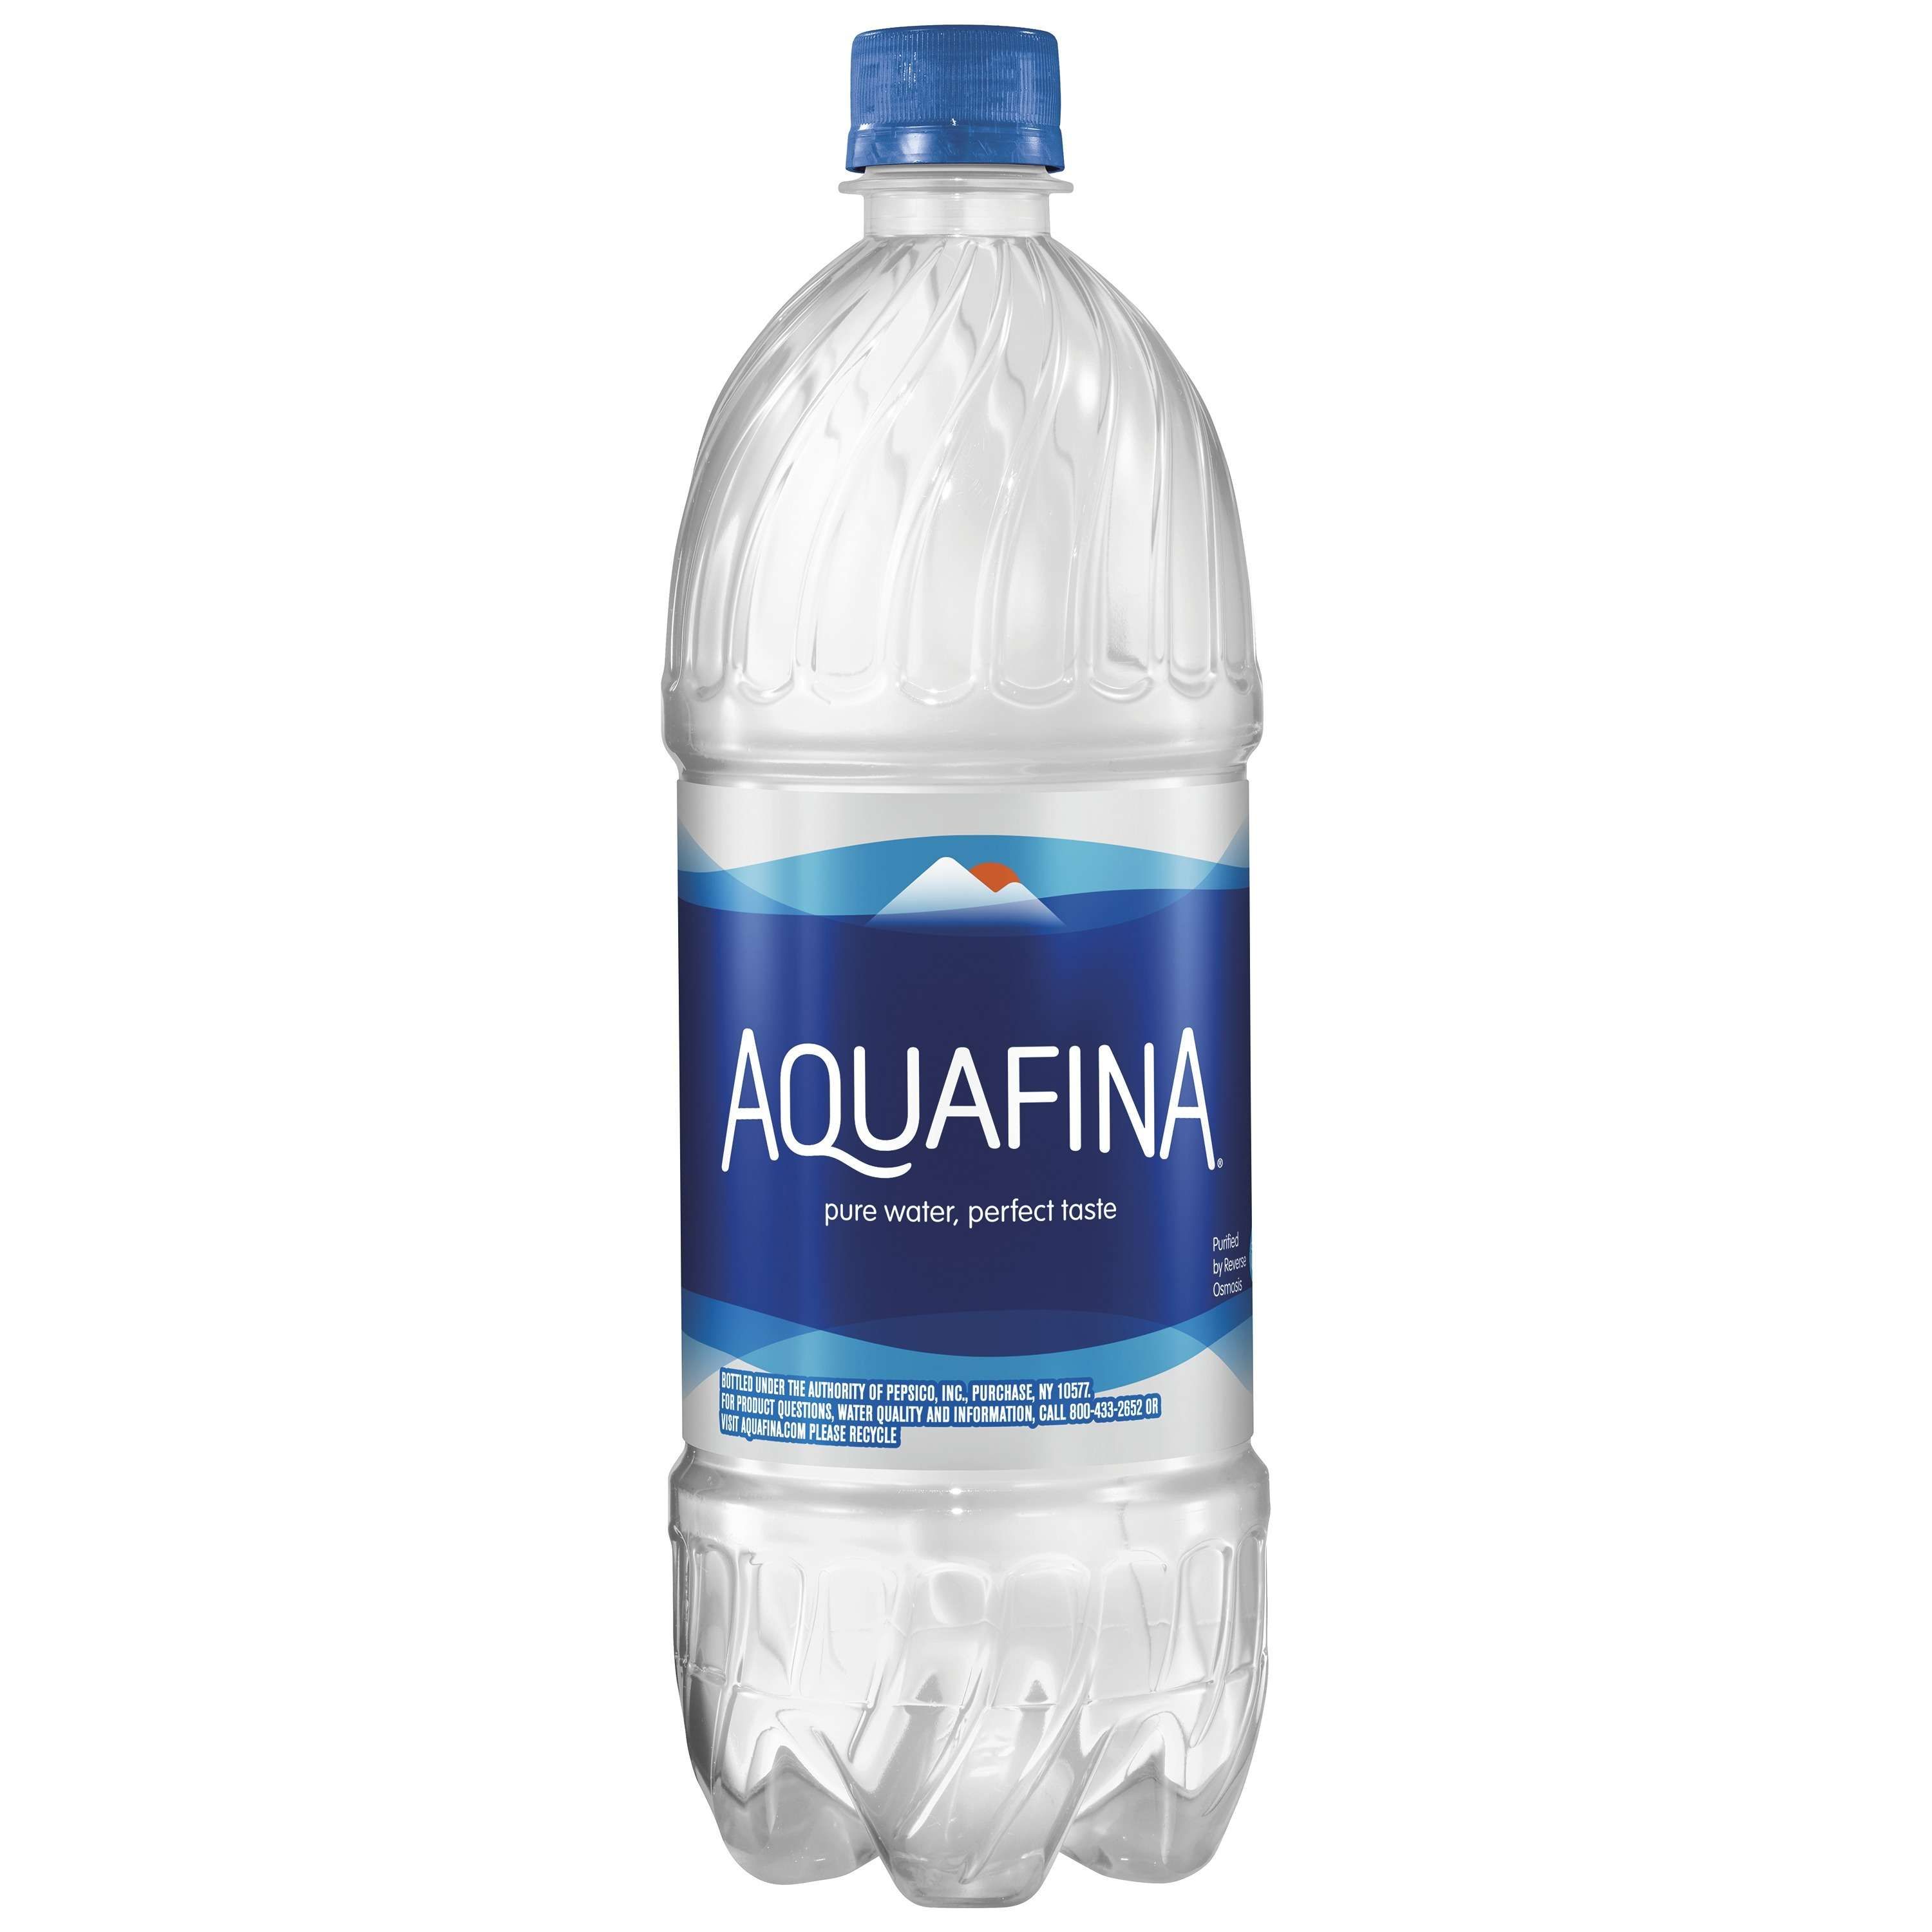 Of aquafina pictures List of